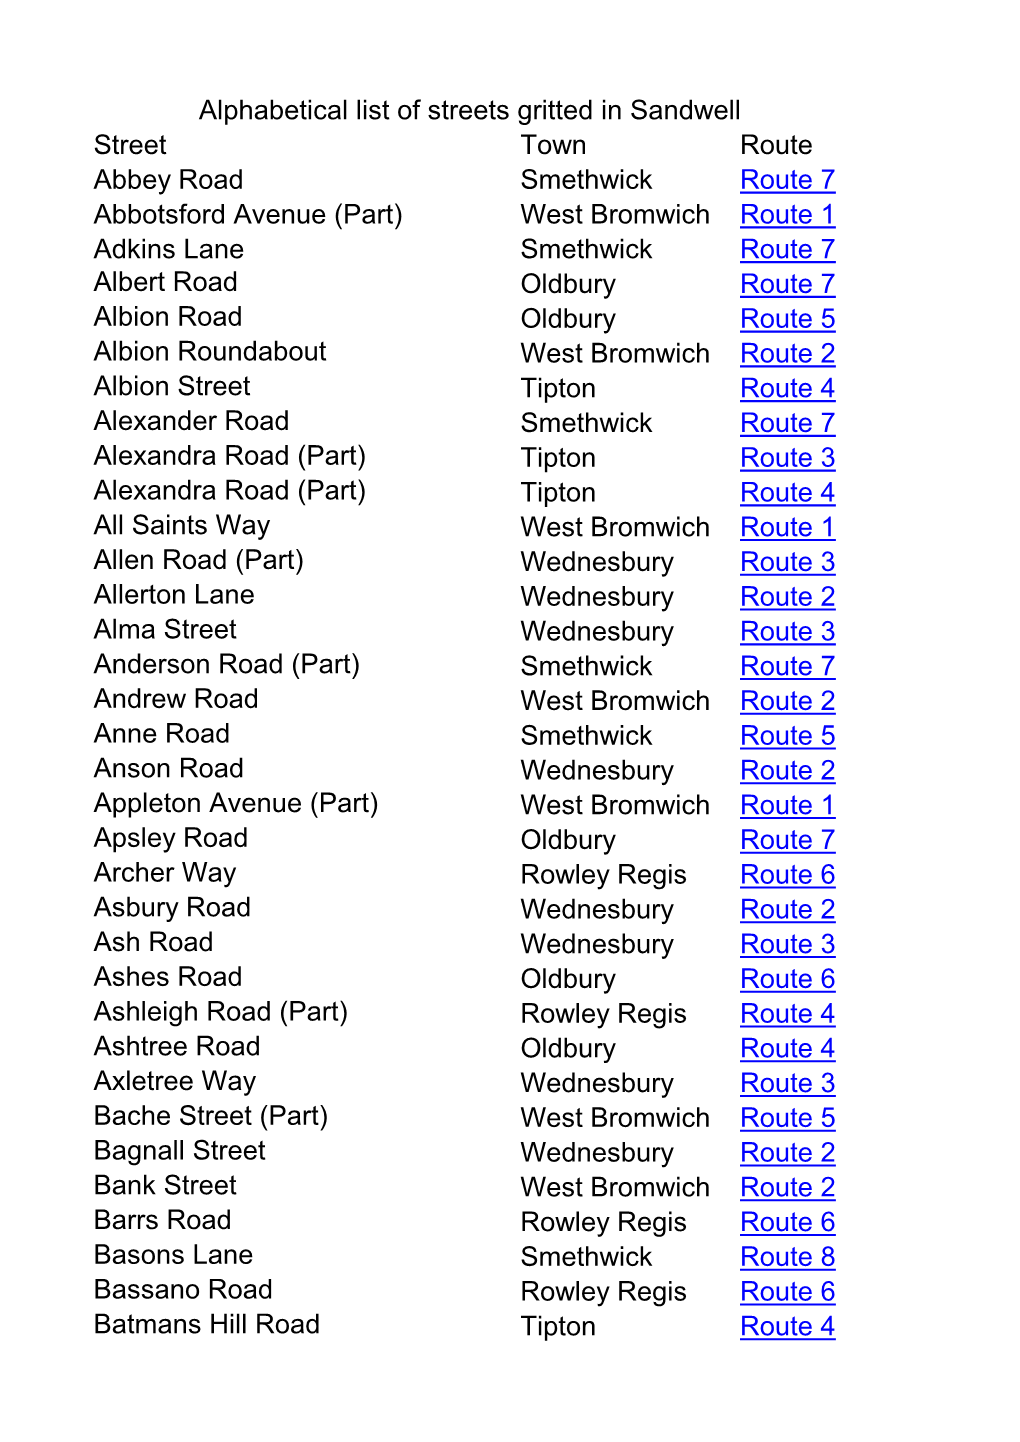 Alphabetical List of Streets Gritted in Sandwell Street Town Route Abbey Road Smethwick Route 7 Abbotsford Avenue (Part) West Br